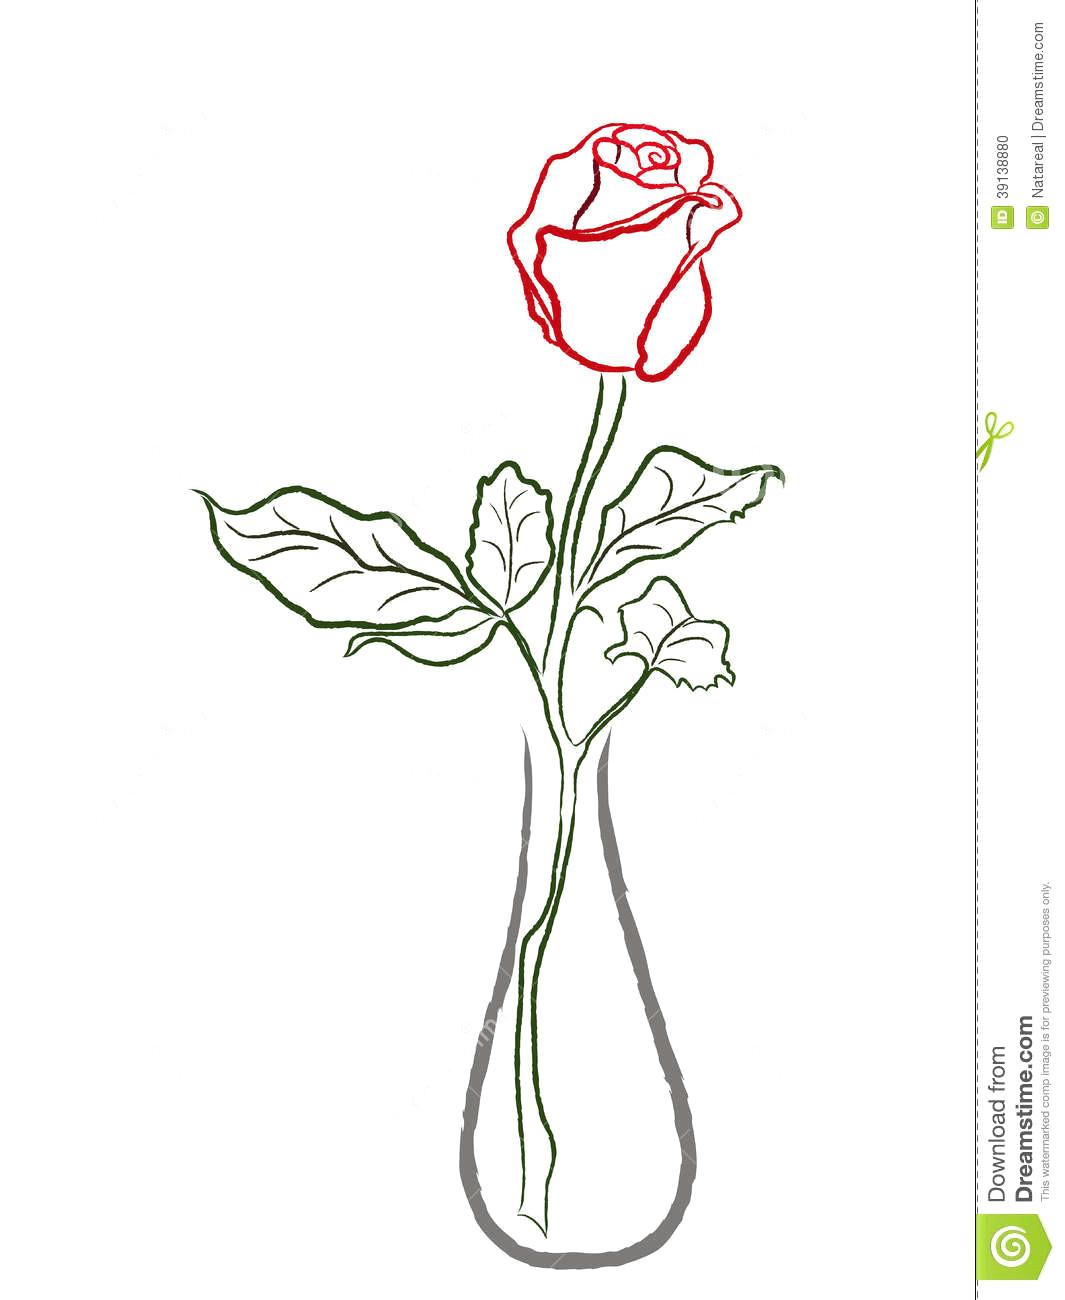 Drawing Of A Rose Stem Pictures Of Roses to Draw Awesome Drawn Vase Red Rose 3h Vases How